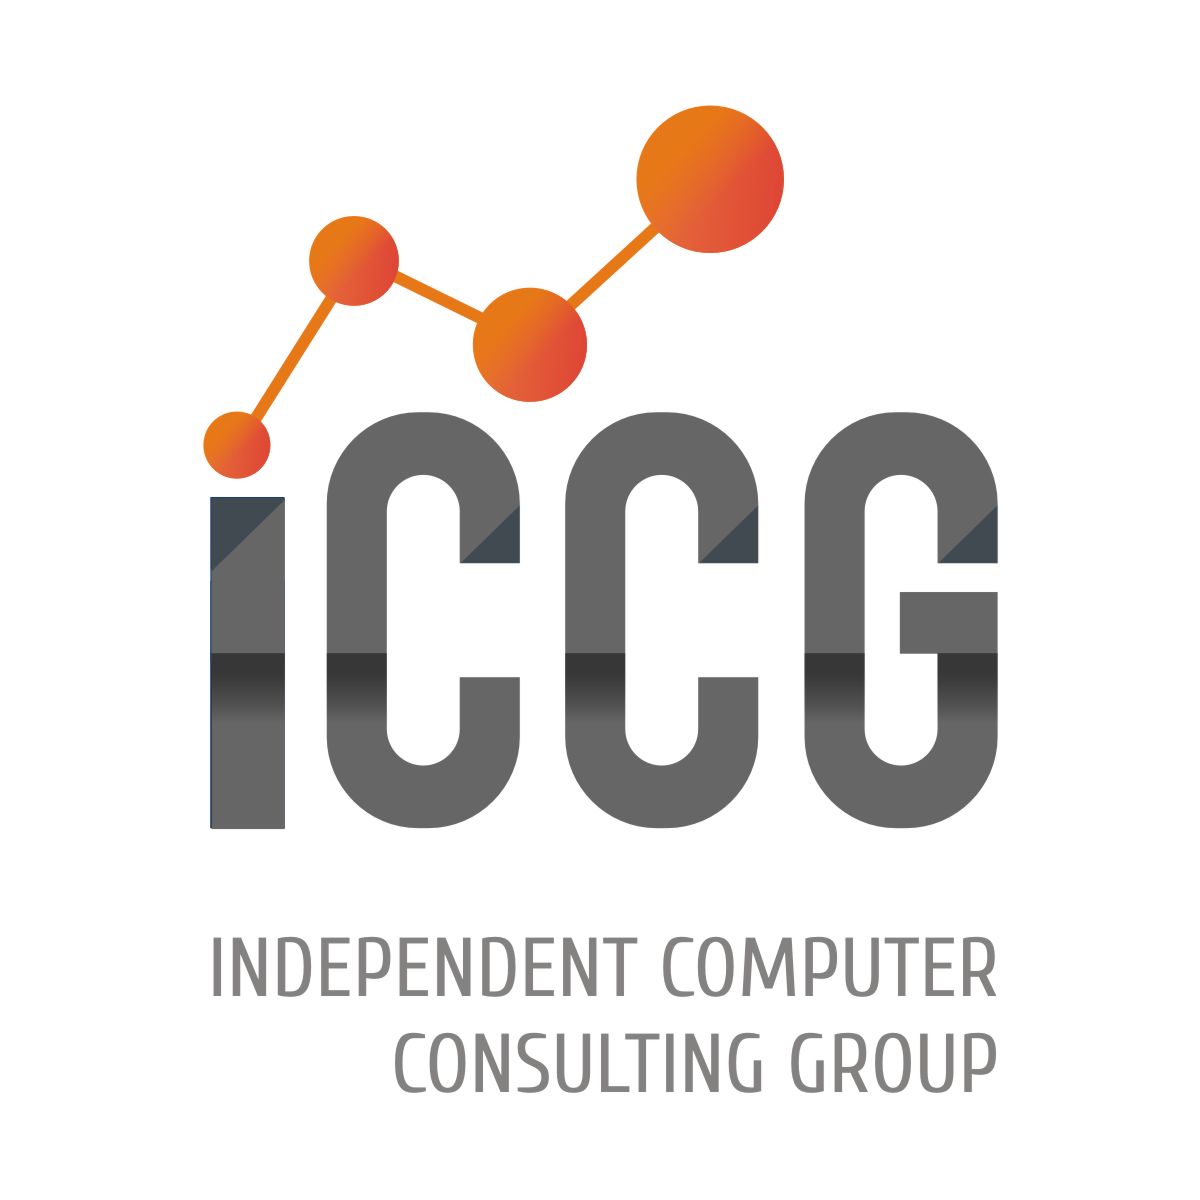 Independent Computer Consulting Group (ICCG) Signs Up as Platinum Partner for JASCI Software